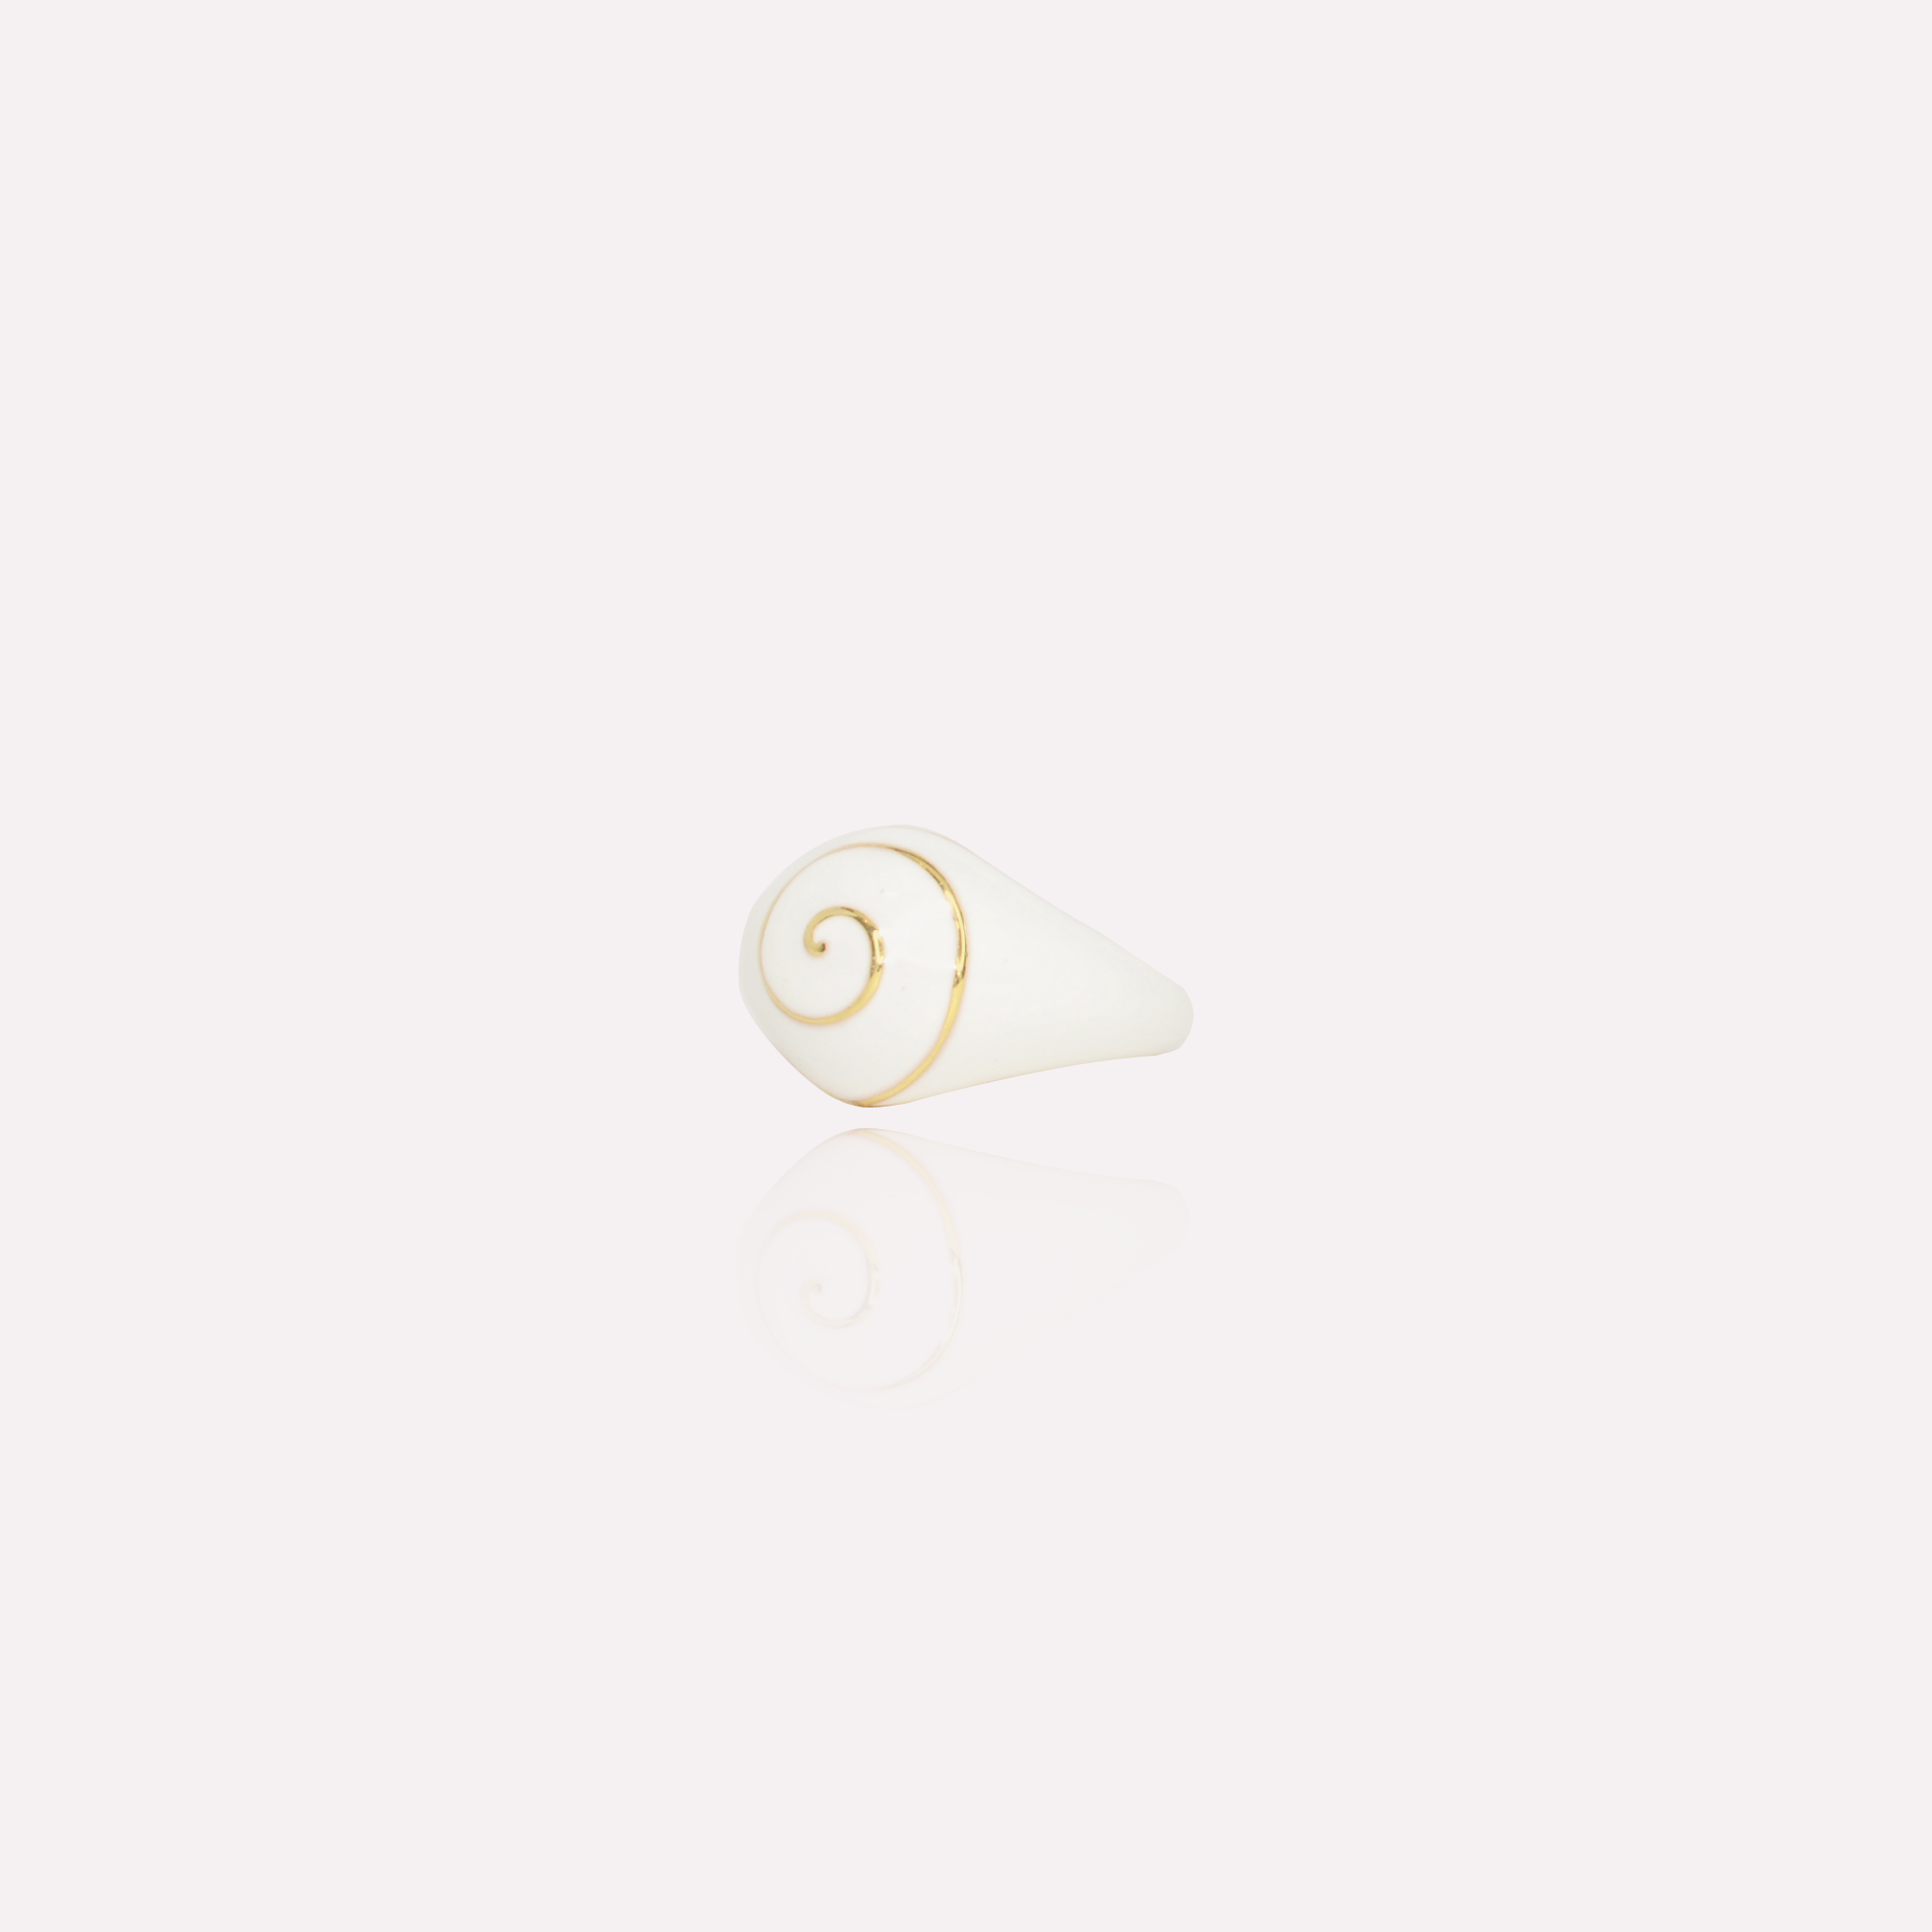 Spiral Seashell Dome Ring